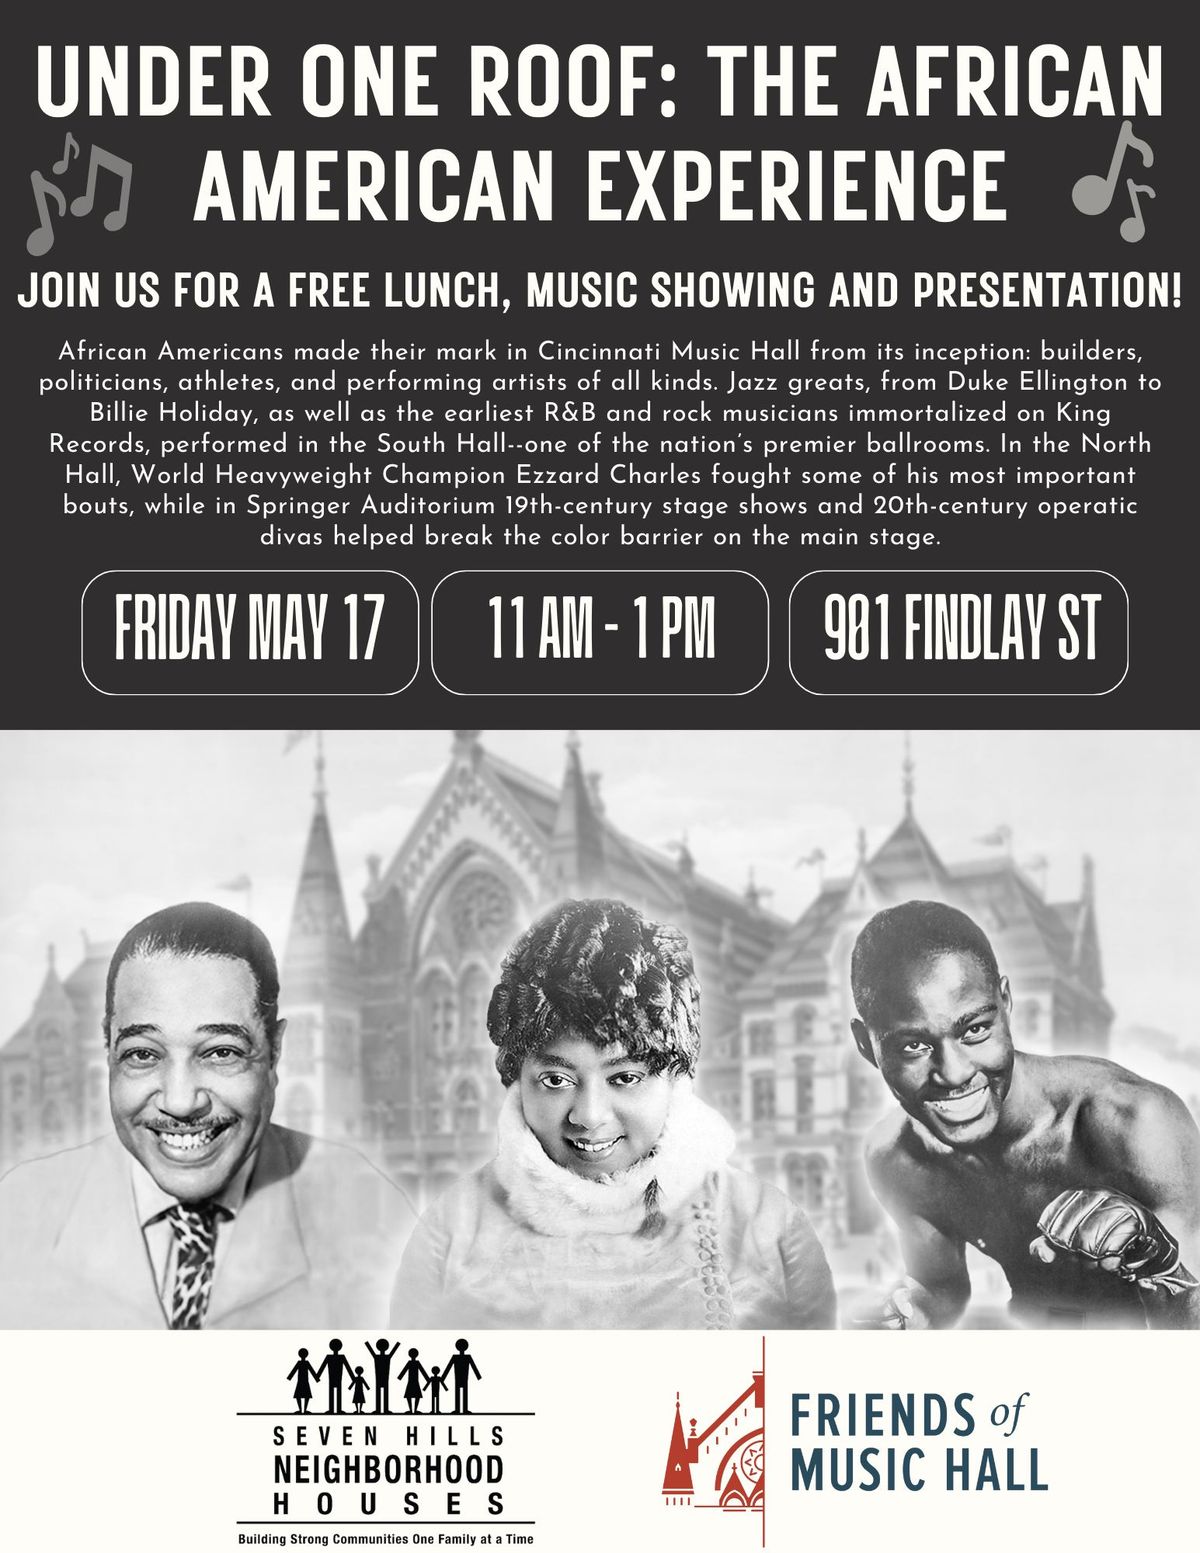 Under One Roof: the African American Experience Free Lunch, Music Showing and Presentation